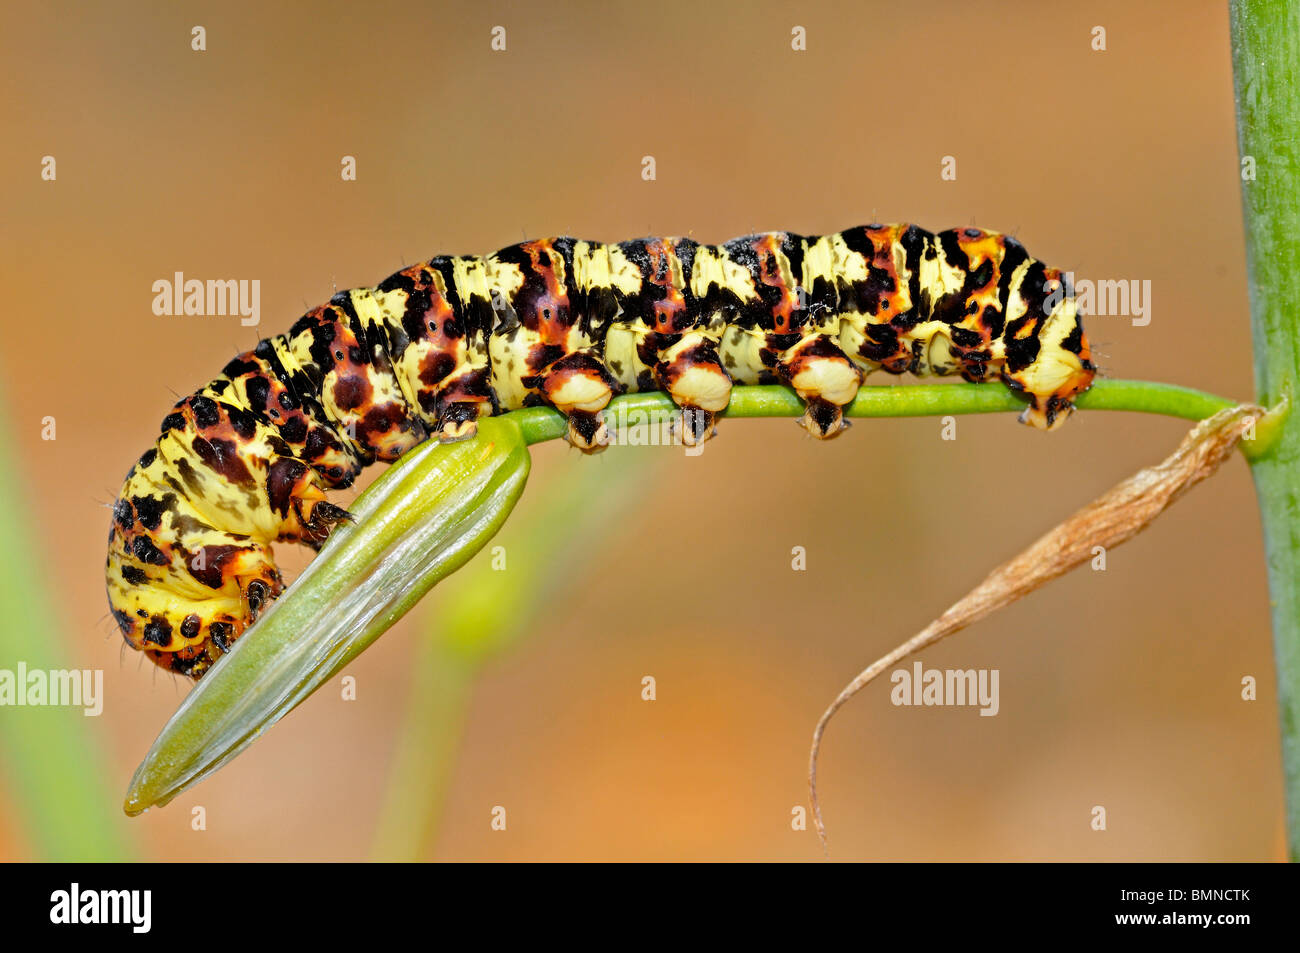 Caterpillar of the Cherry spot moth or Lily borer (Diaphone eumela), Namaqualand, South Africa Stock Photo